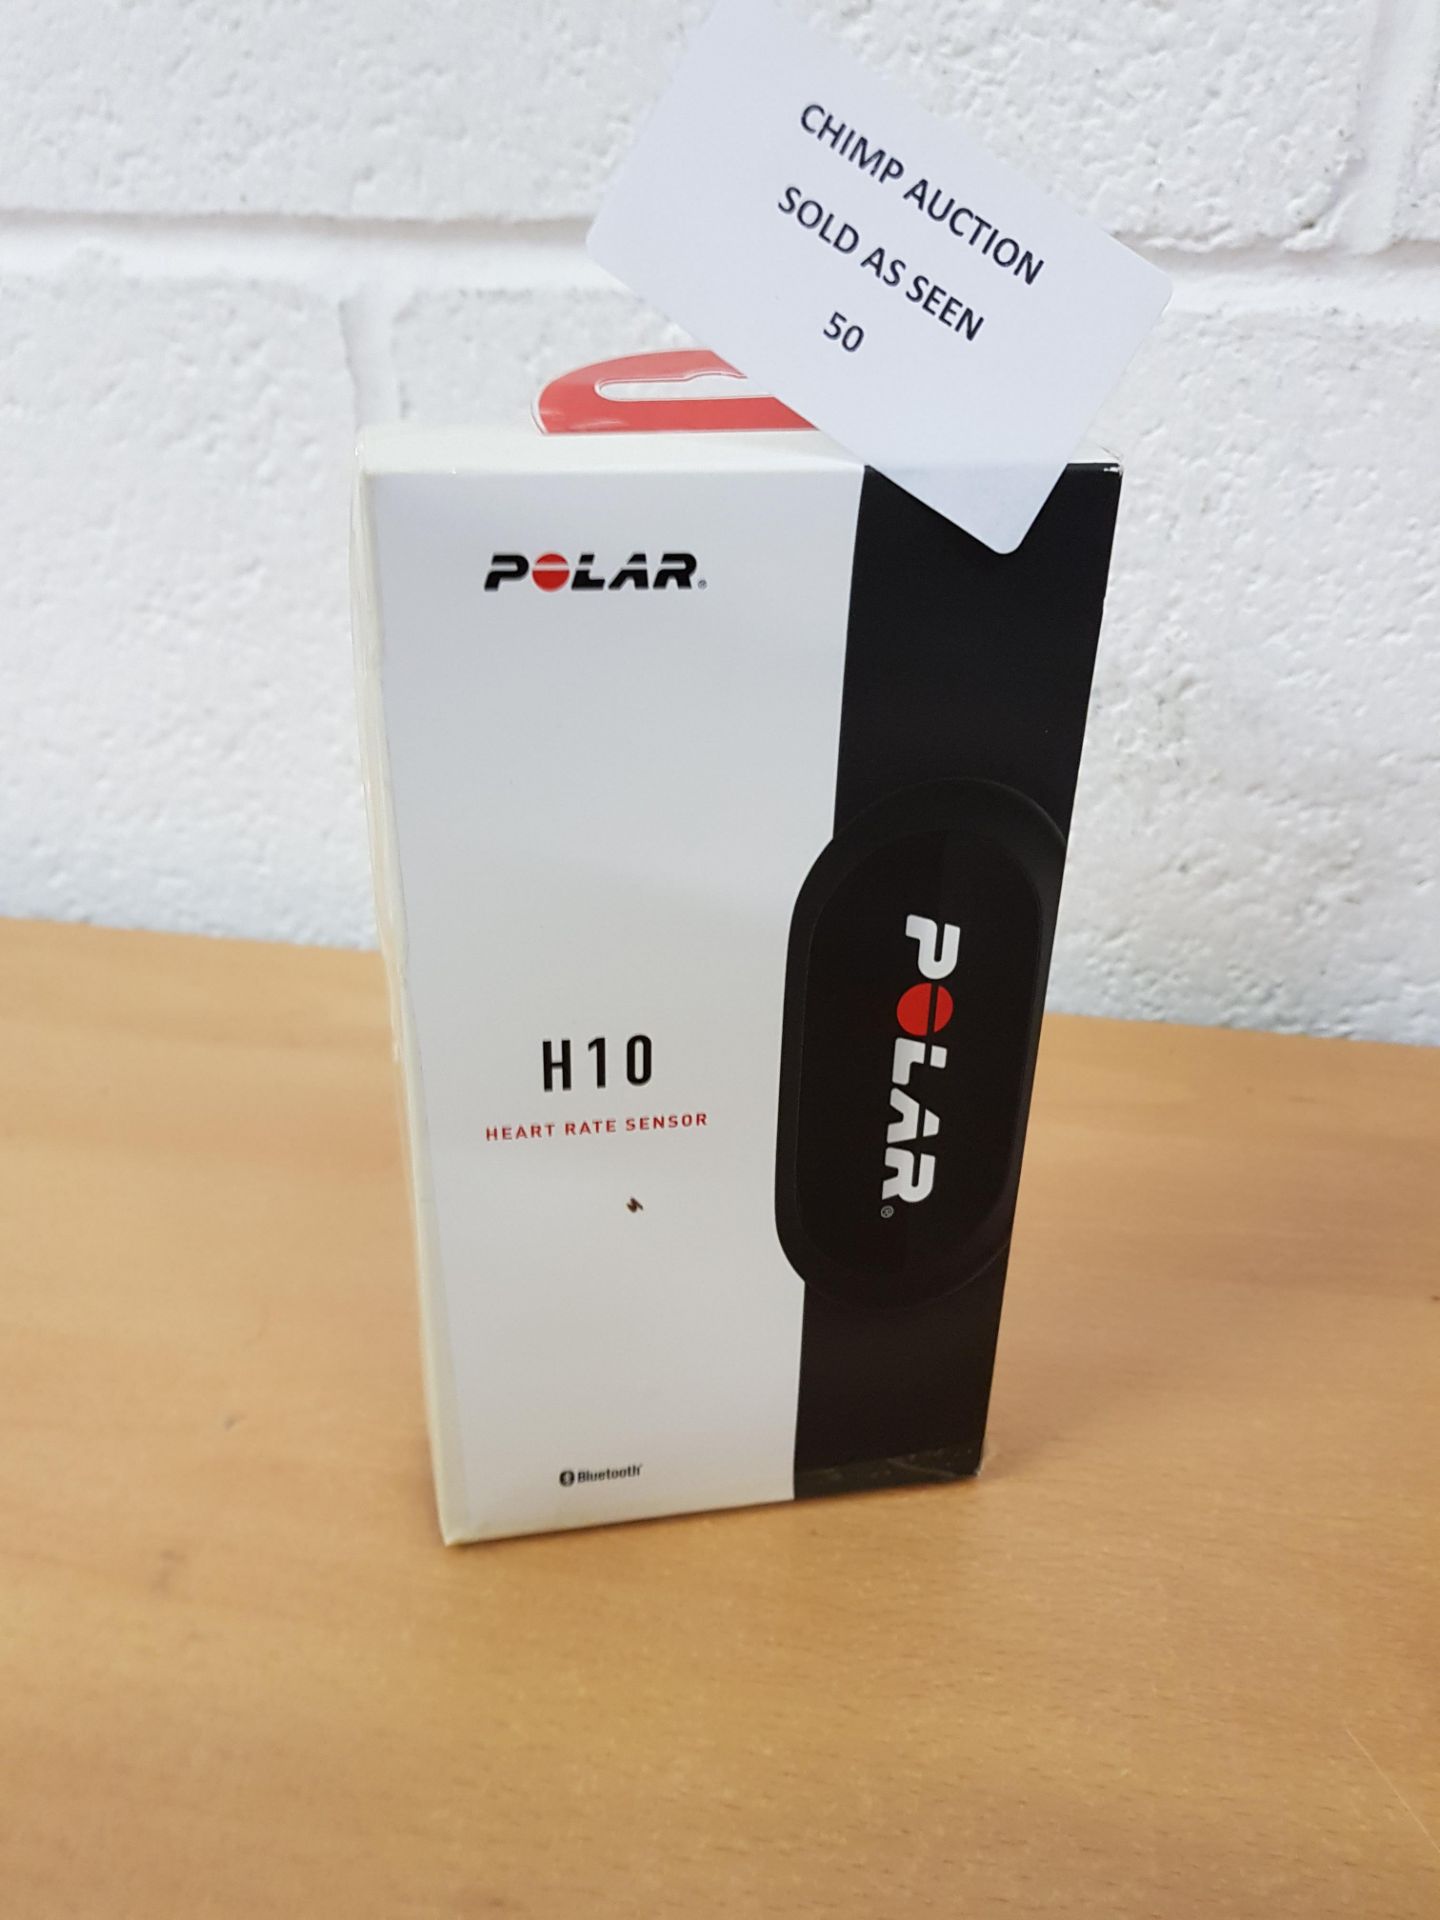 Polar H10 Heart Rate Sensor and Pro Chest Strap RRP £79.99.